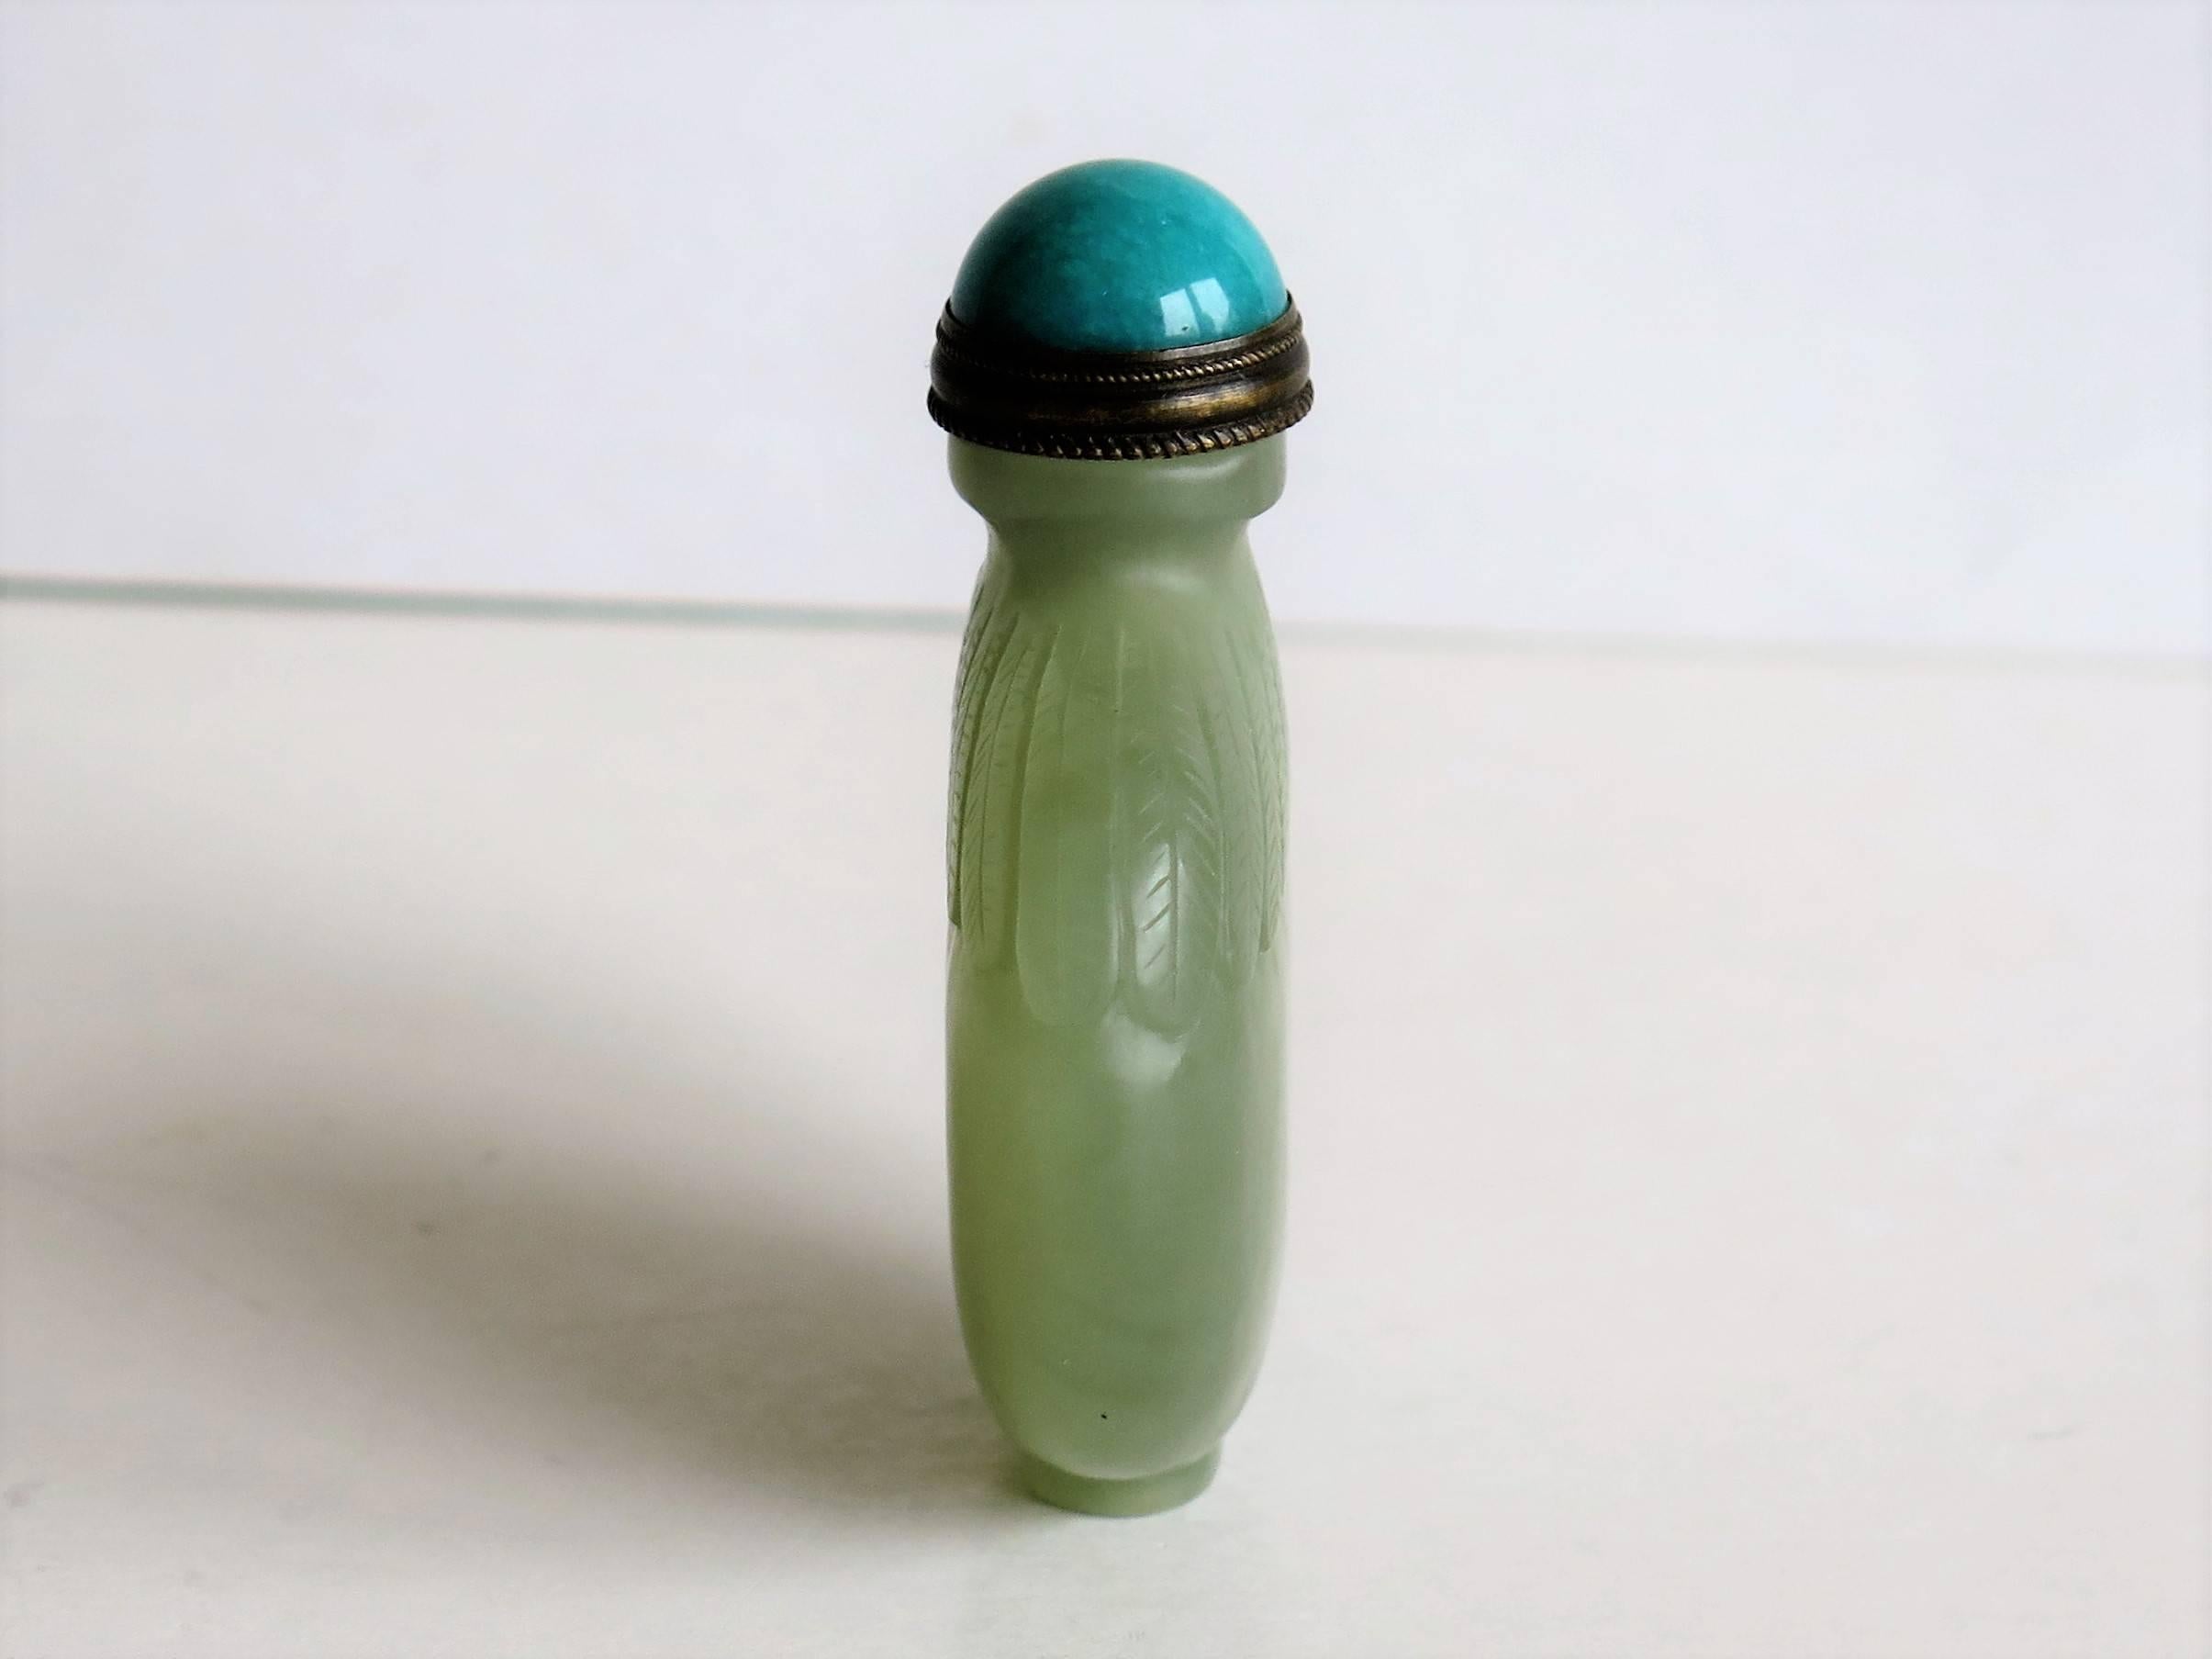 snuff bottle and spoon